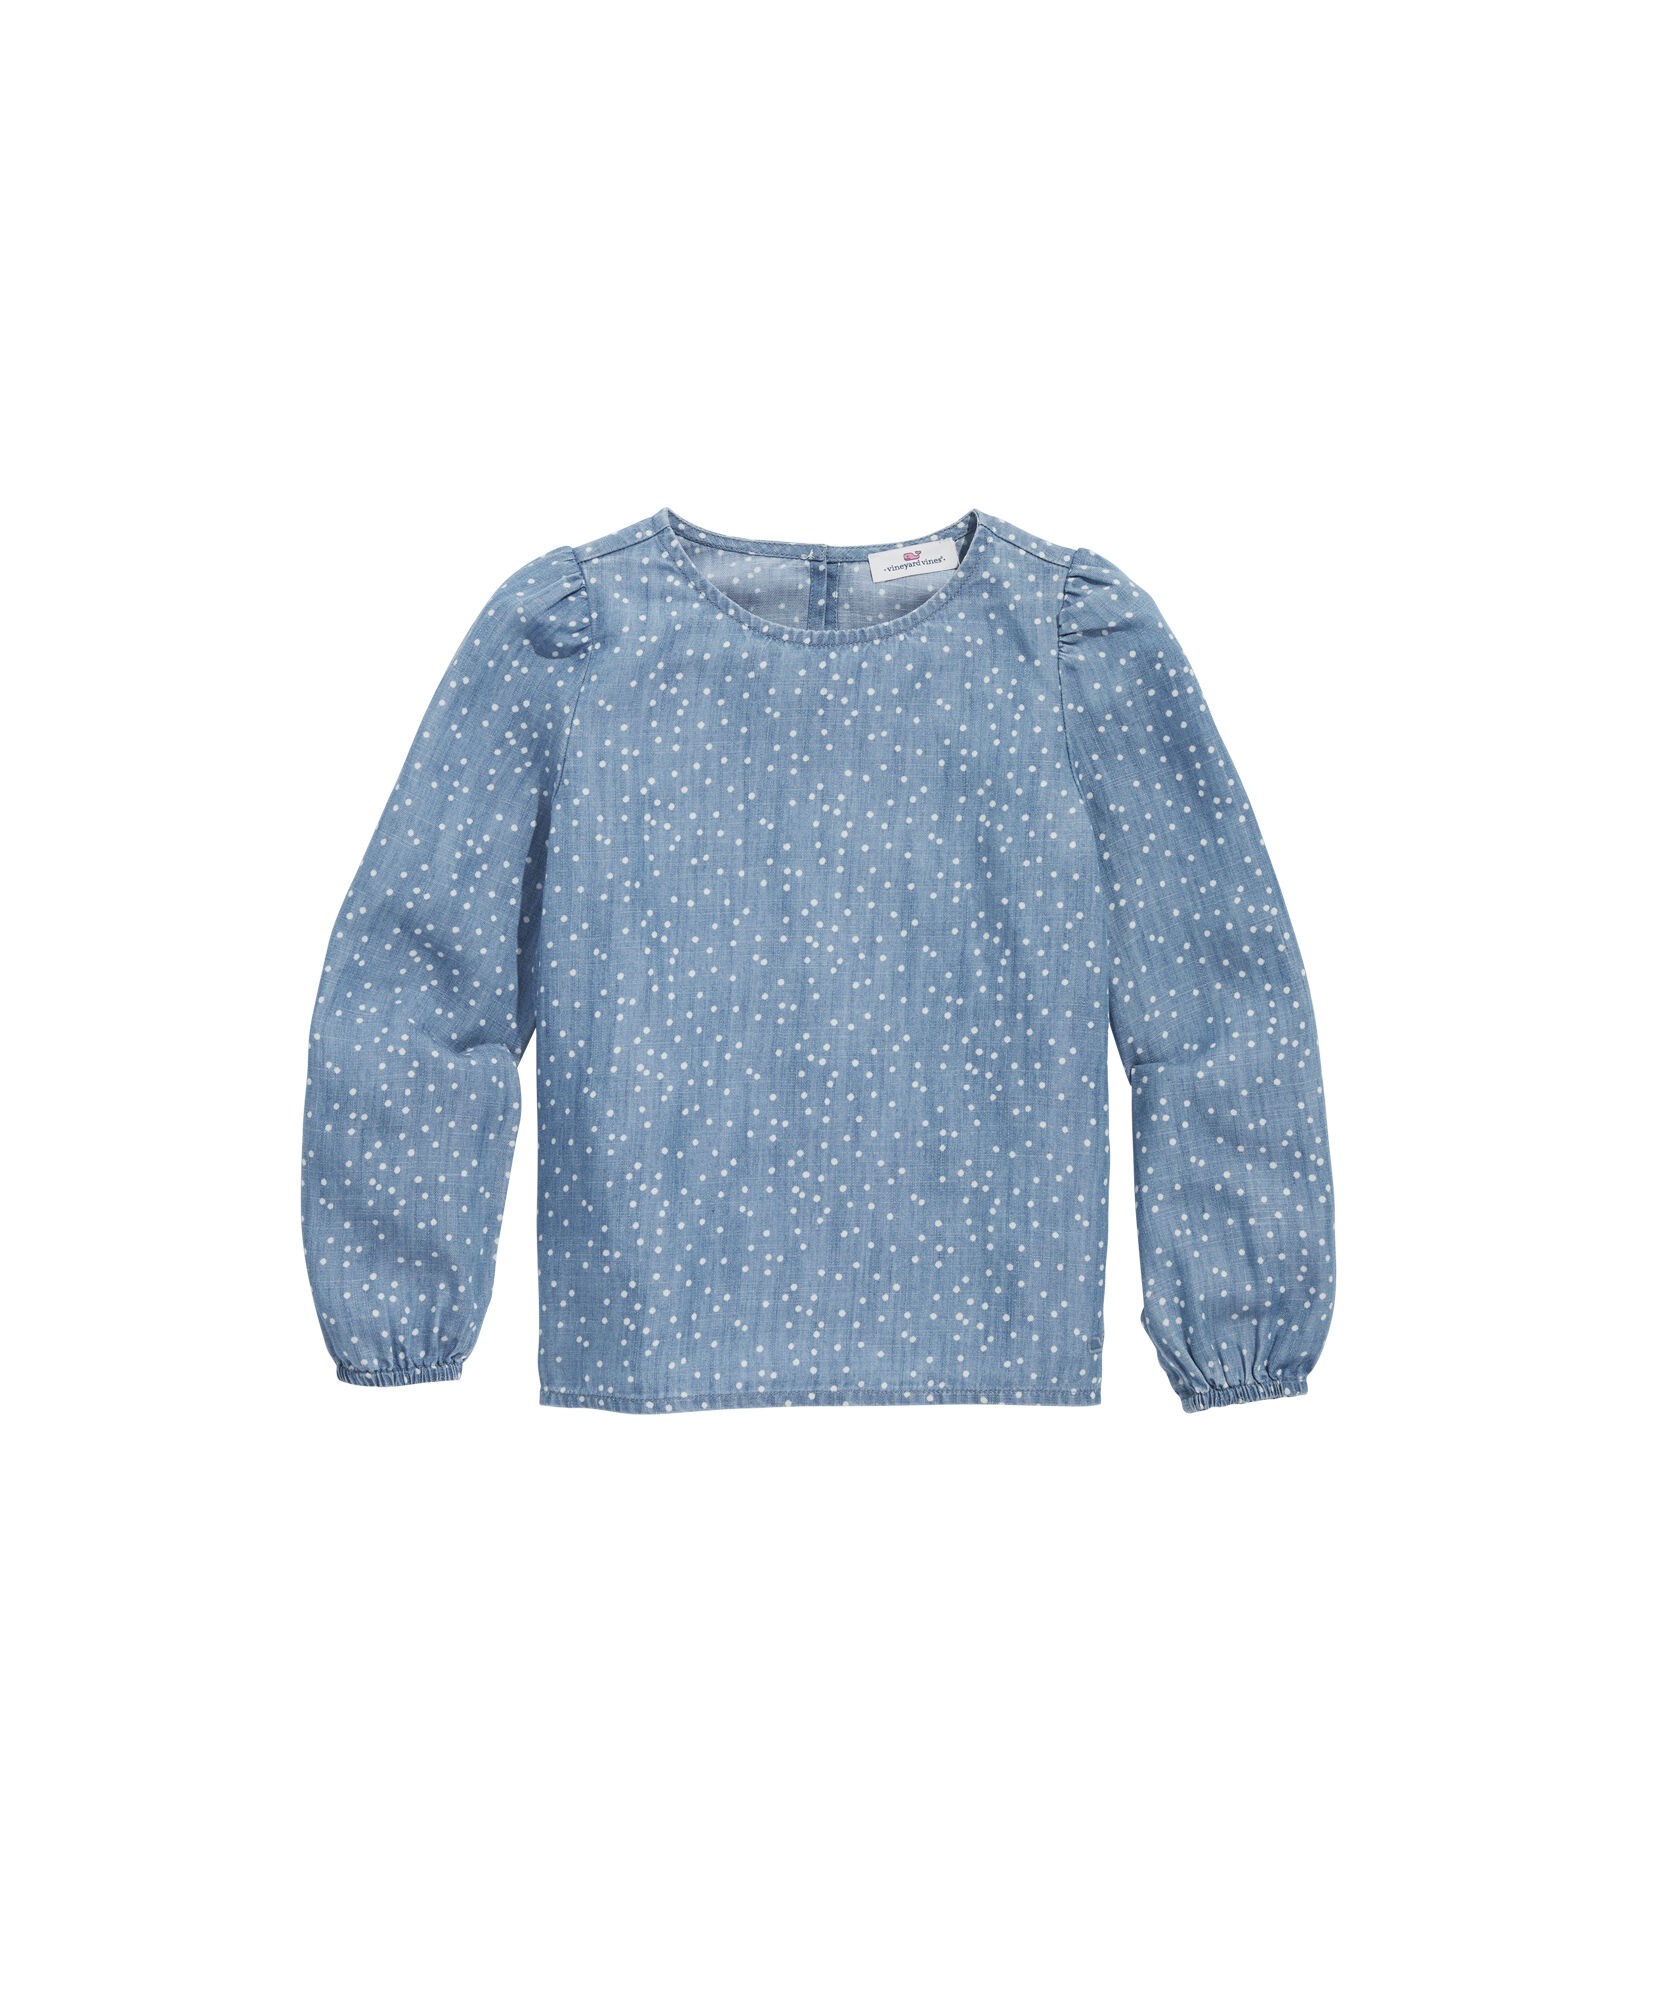 OUTLET Girls' Chambray Scattered Dot Top